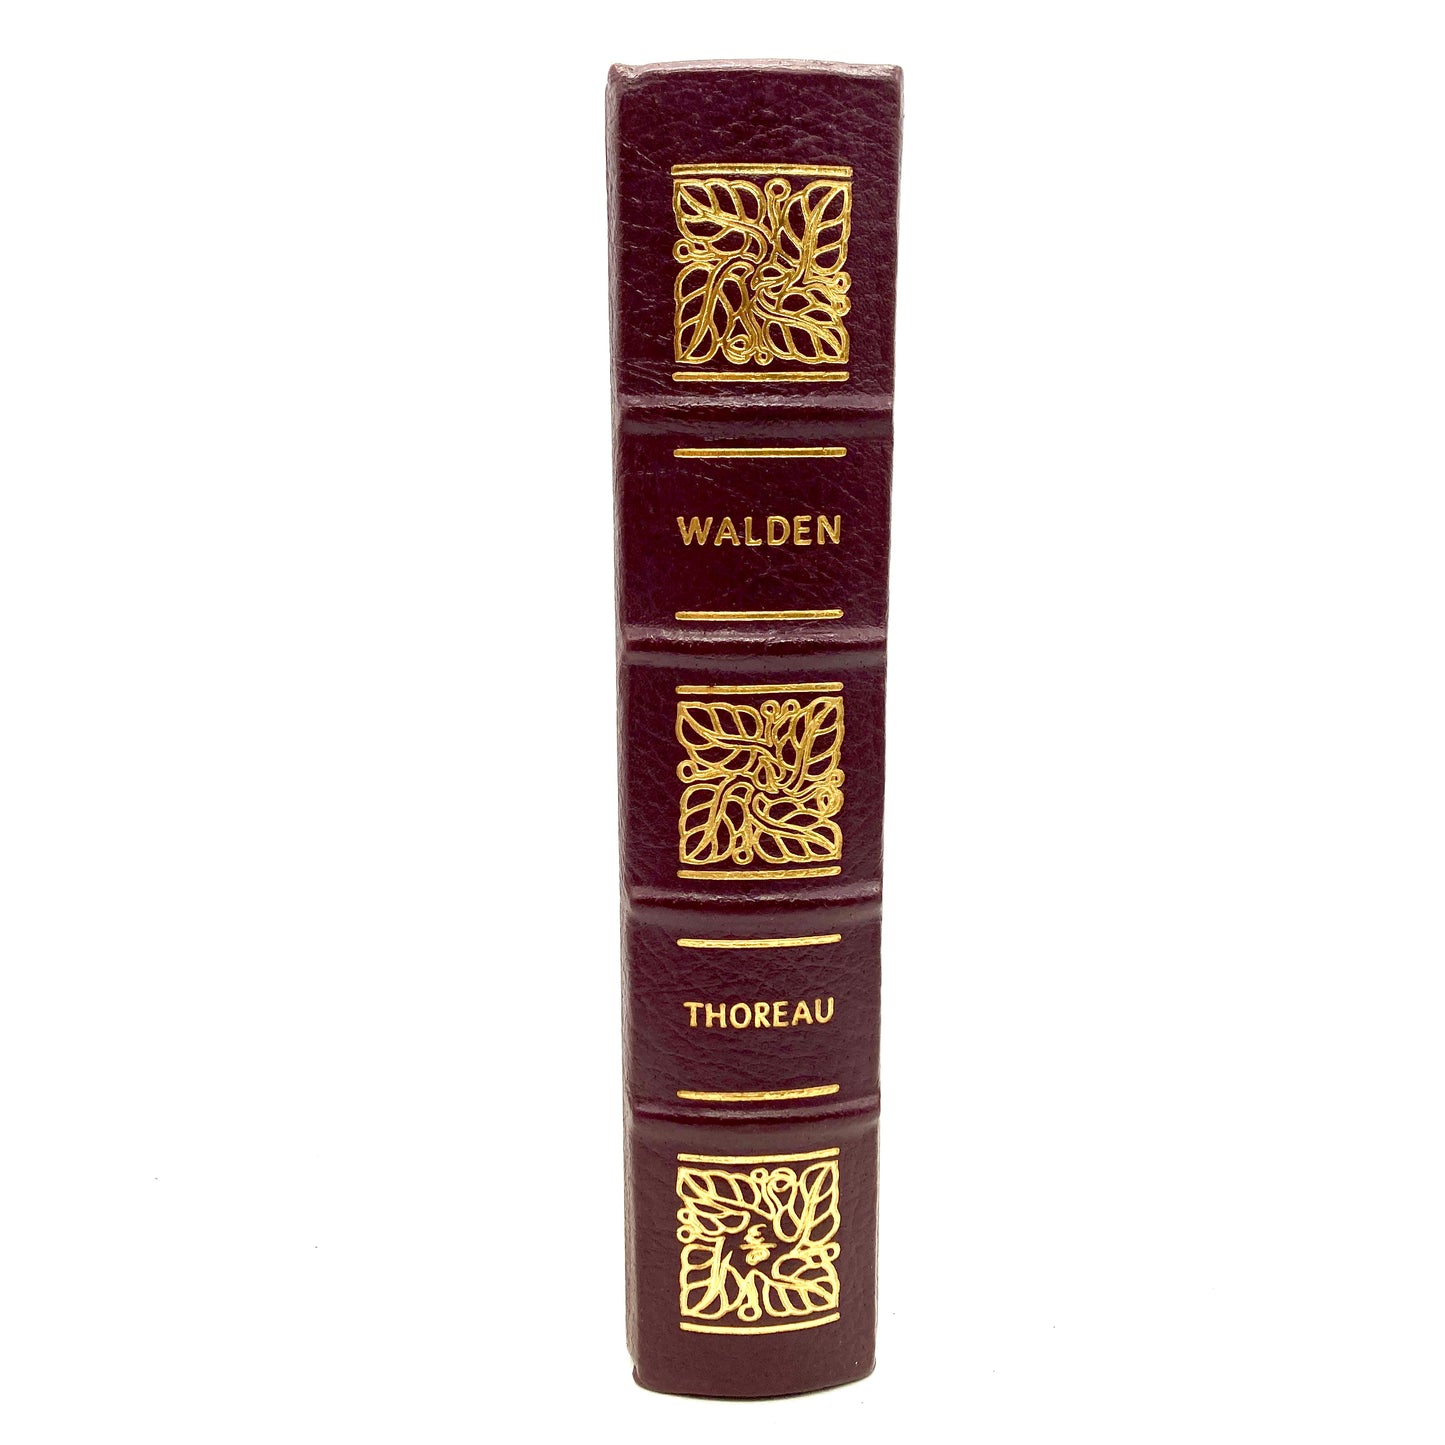 THOREAU, Henry David "Walden, or Life in the Woods" [Easton Press, 1981]